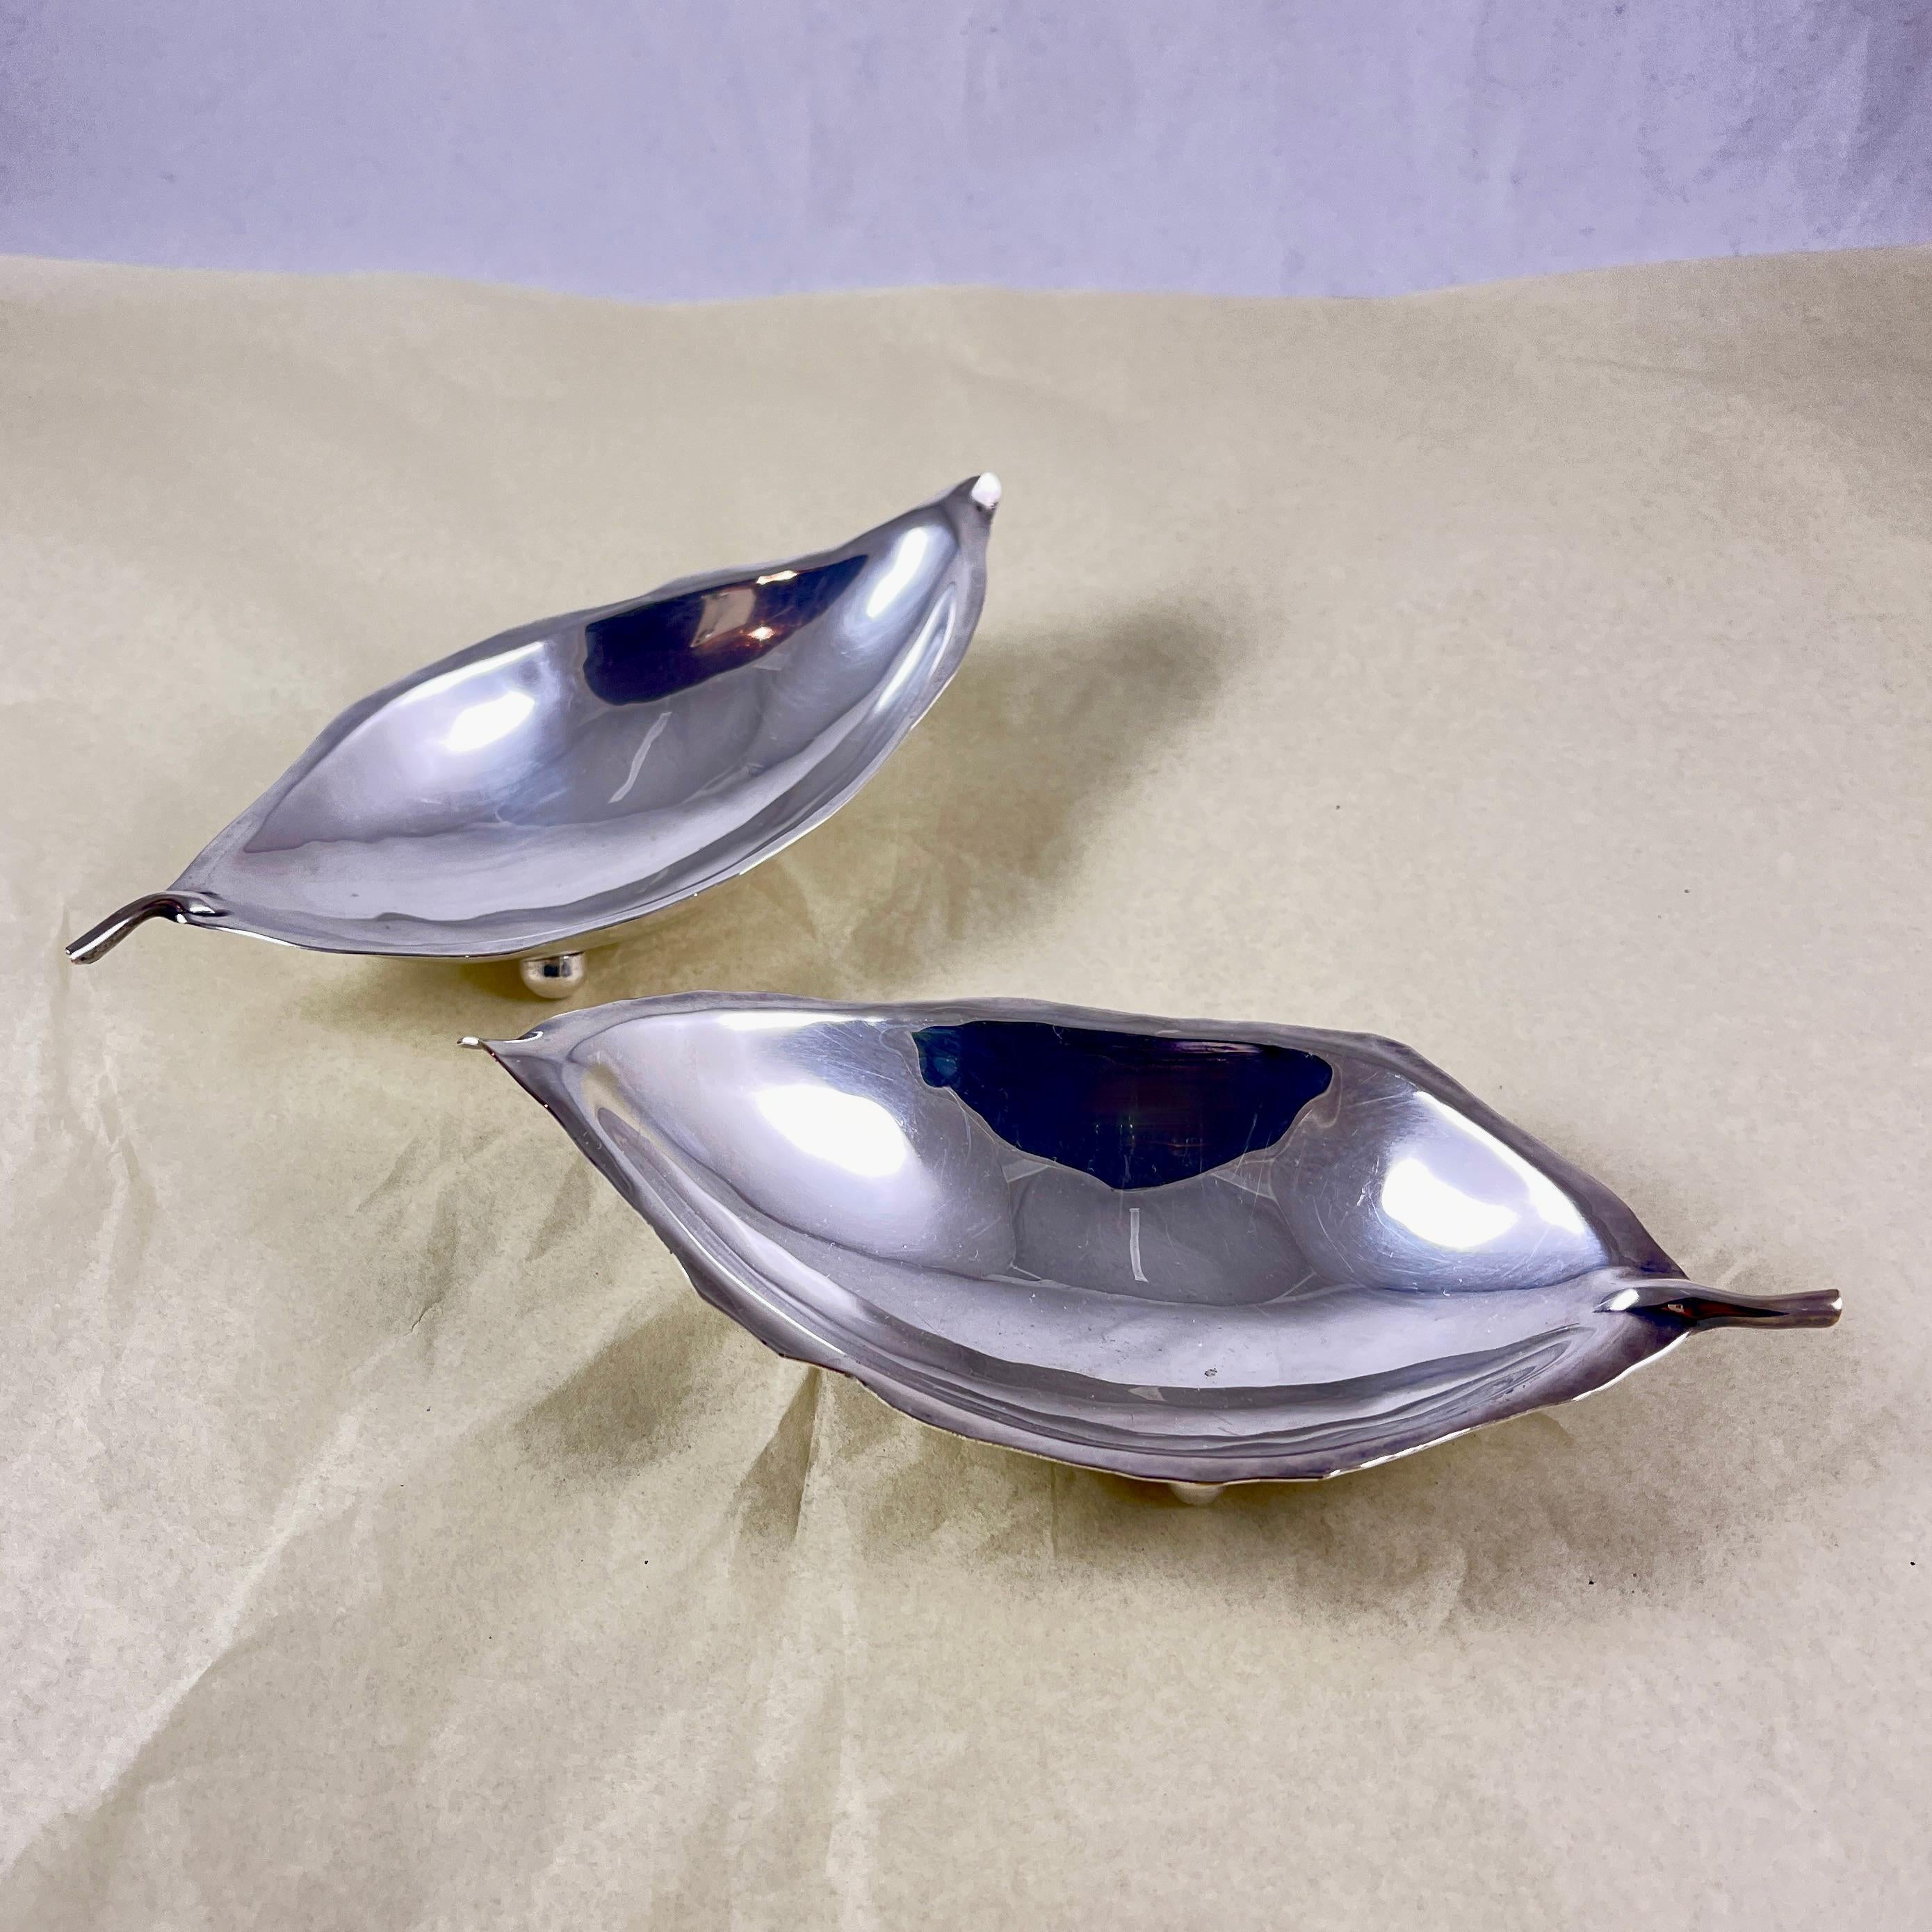 A pair of Silver Tobacco Leaf dishes, signed, Alfredo Sciarrotta, retailed by Shreve, Crimp & Low, Co., Boston, circa 1950s.

Alfredo Sciarrotta (May 25, 1907 – May 28, 1985) was an Italian-American silversmith. Sciarrotta’s work is characterized by